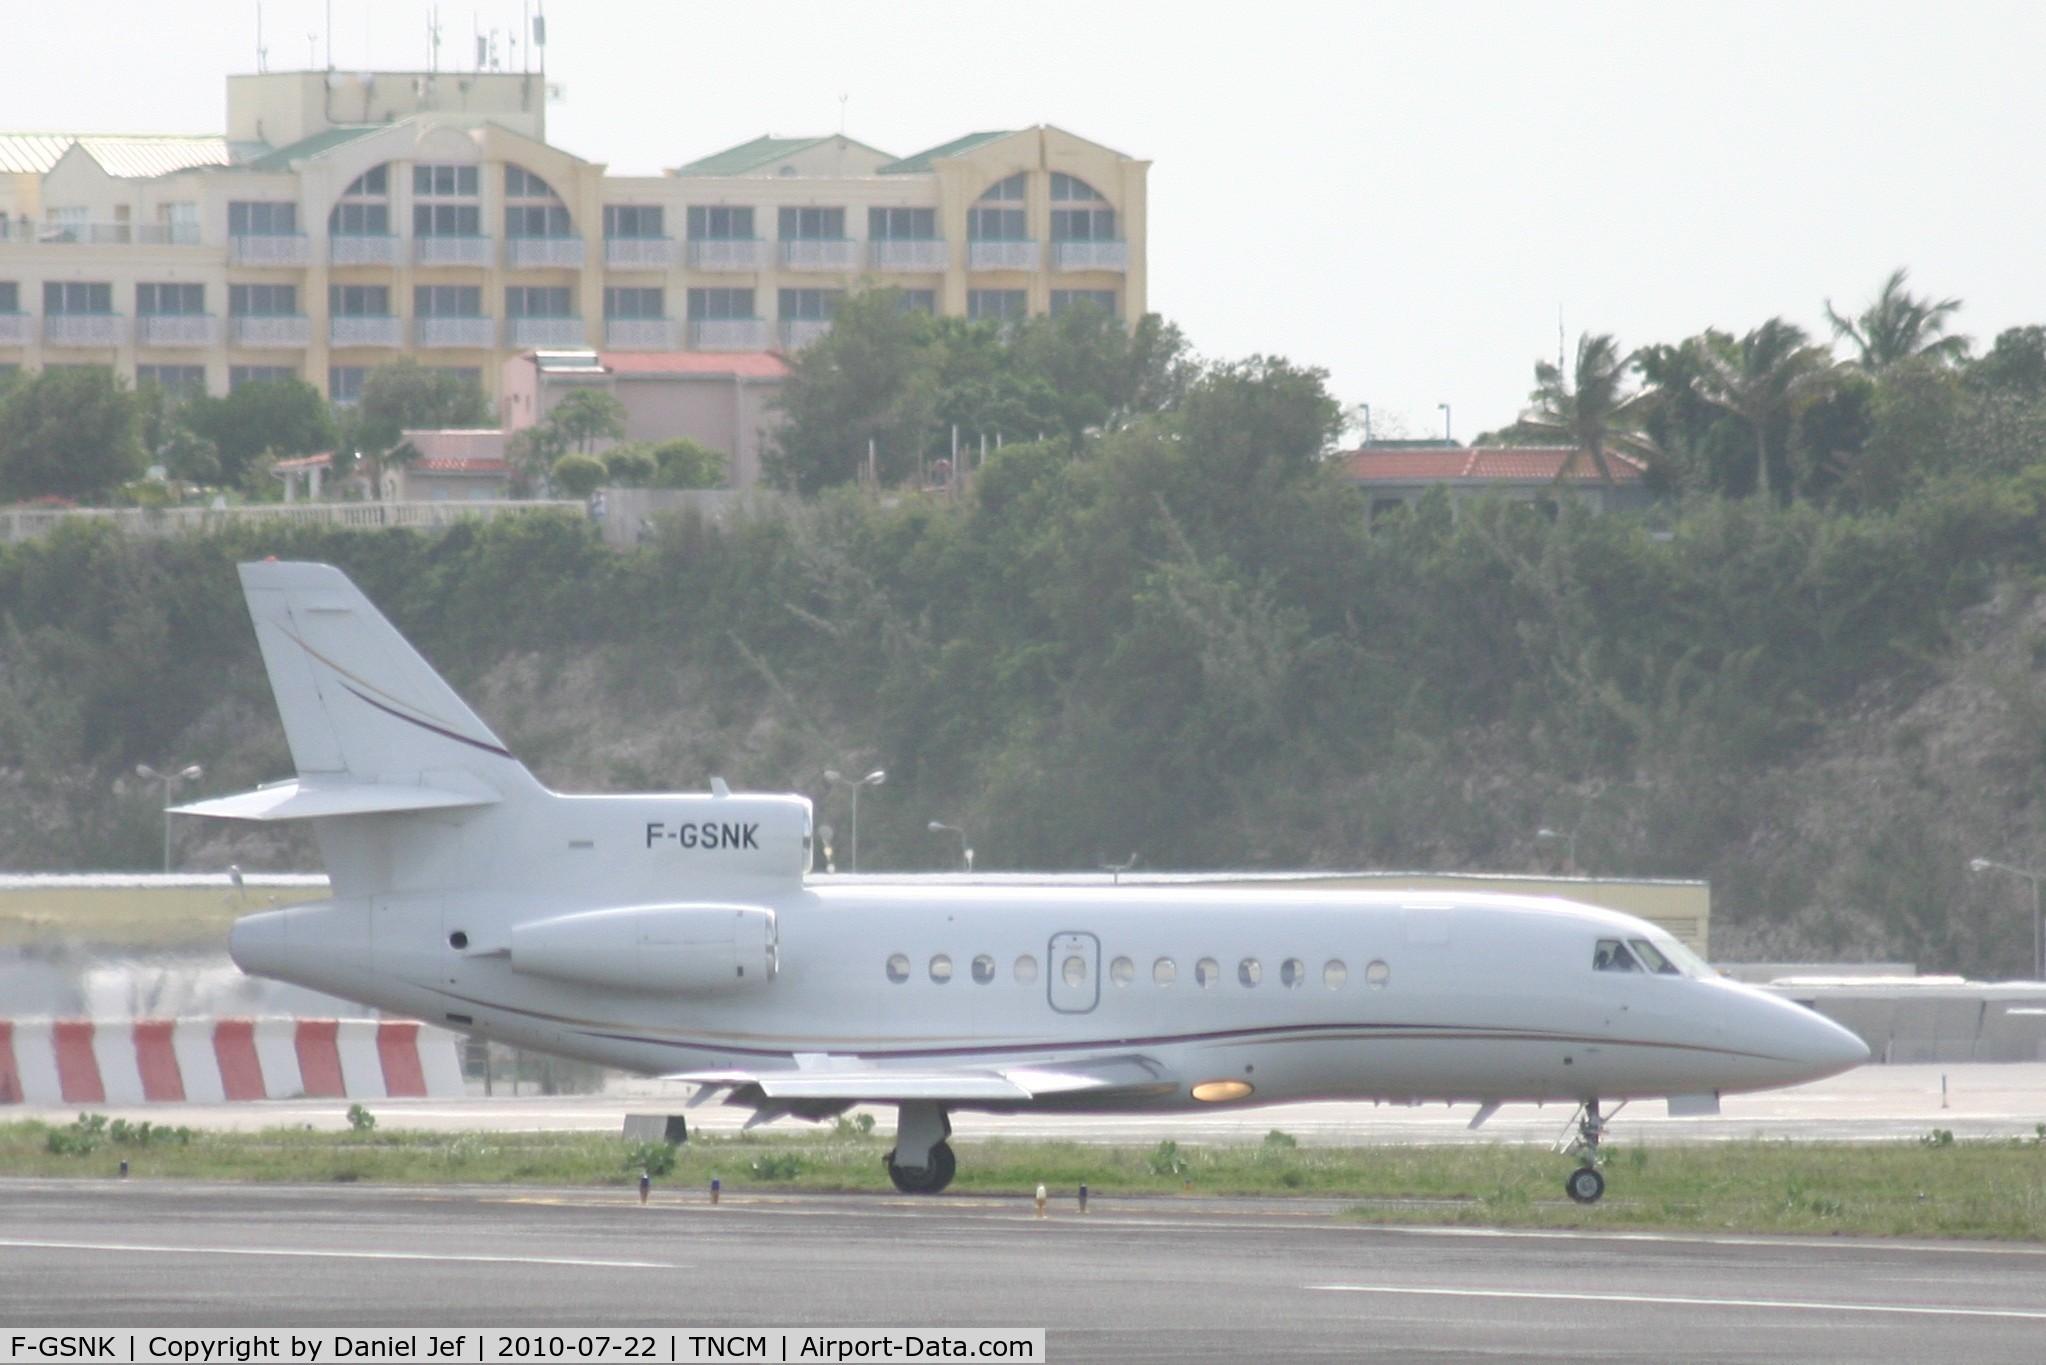 F-GSNK, 1992 Dassault Falcon 900 C/N 115, F-GSNK taxing to parking after crossing the atlantic